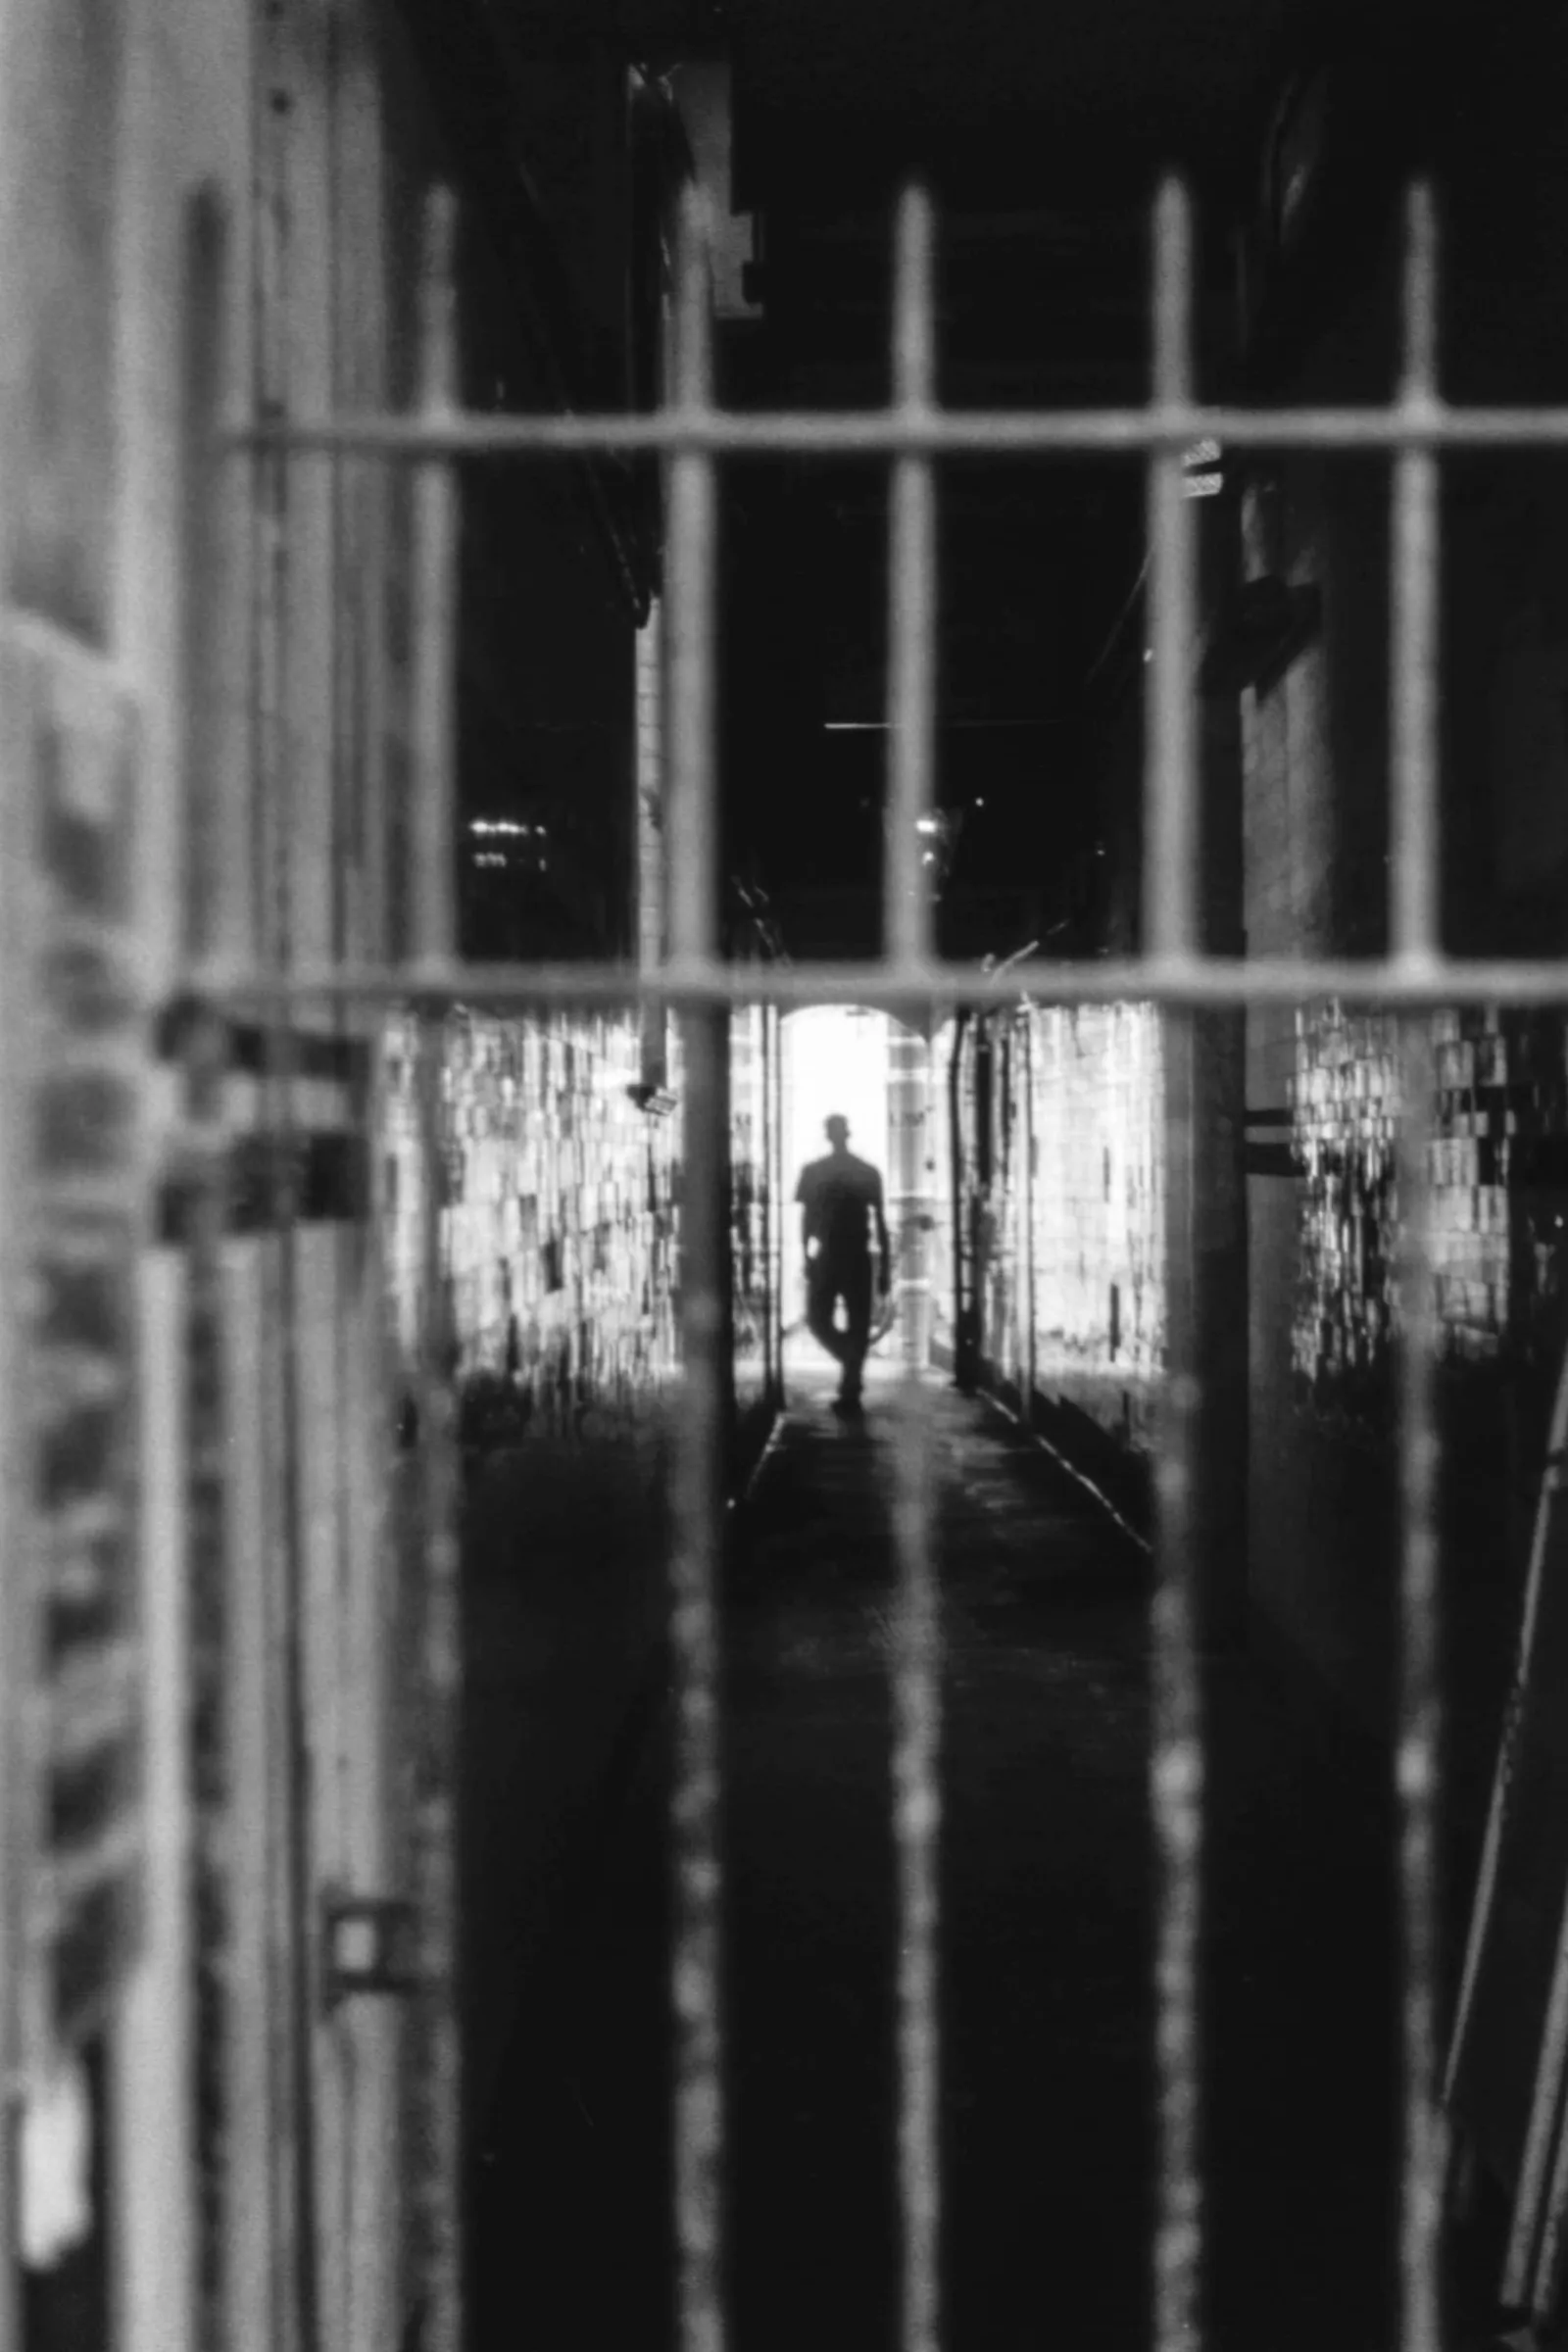 Between the steel bars, we see the silhouette of a man approaching.